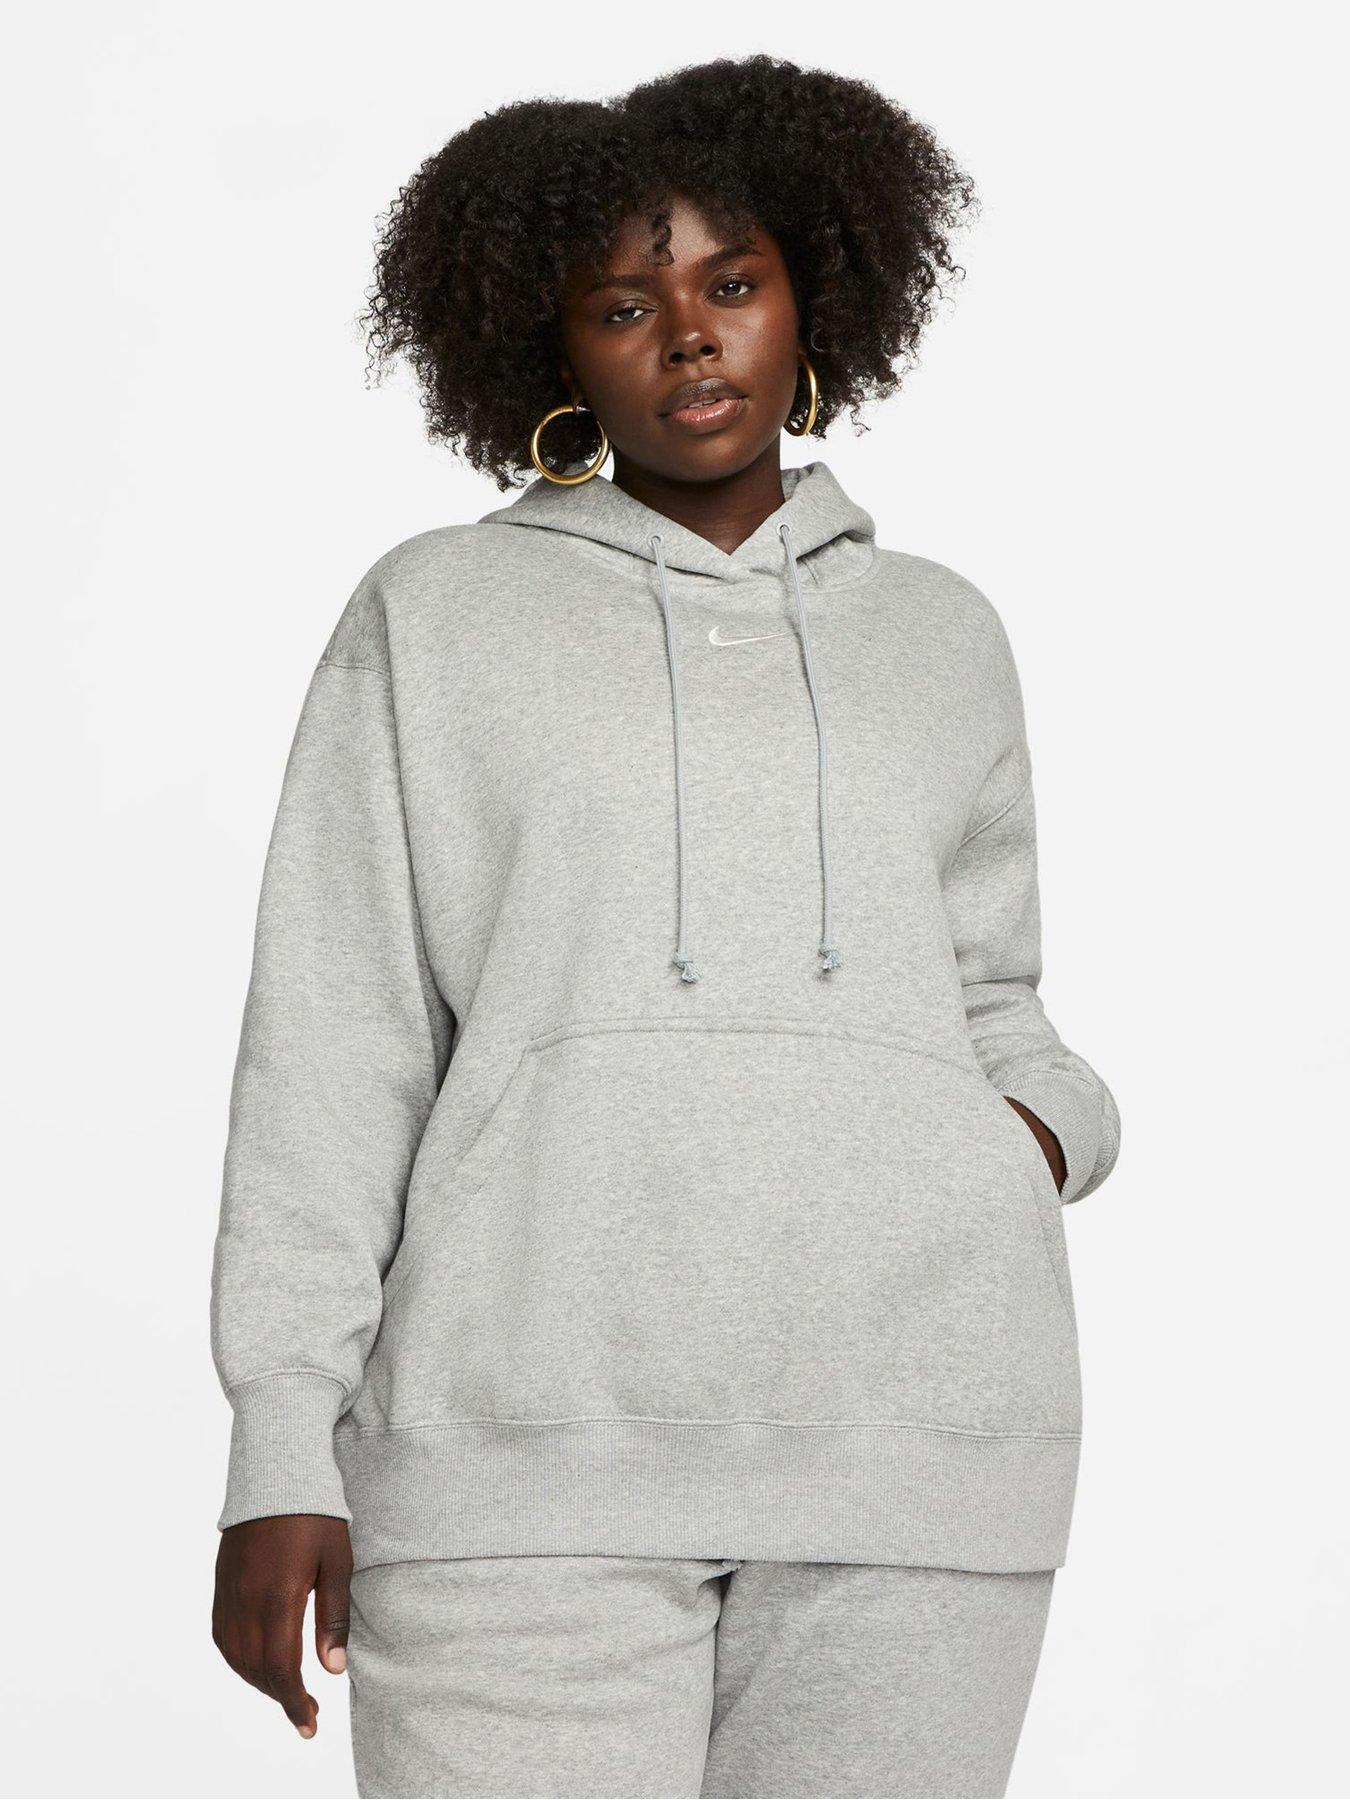 Womens Oversized Hoodies & Pullovers.